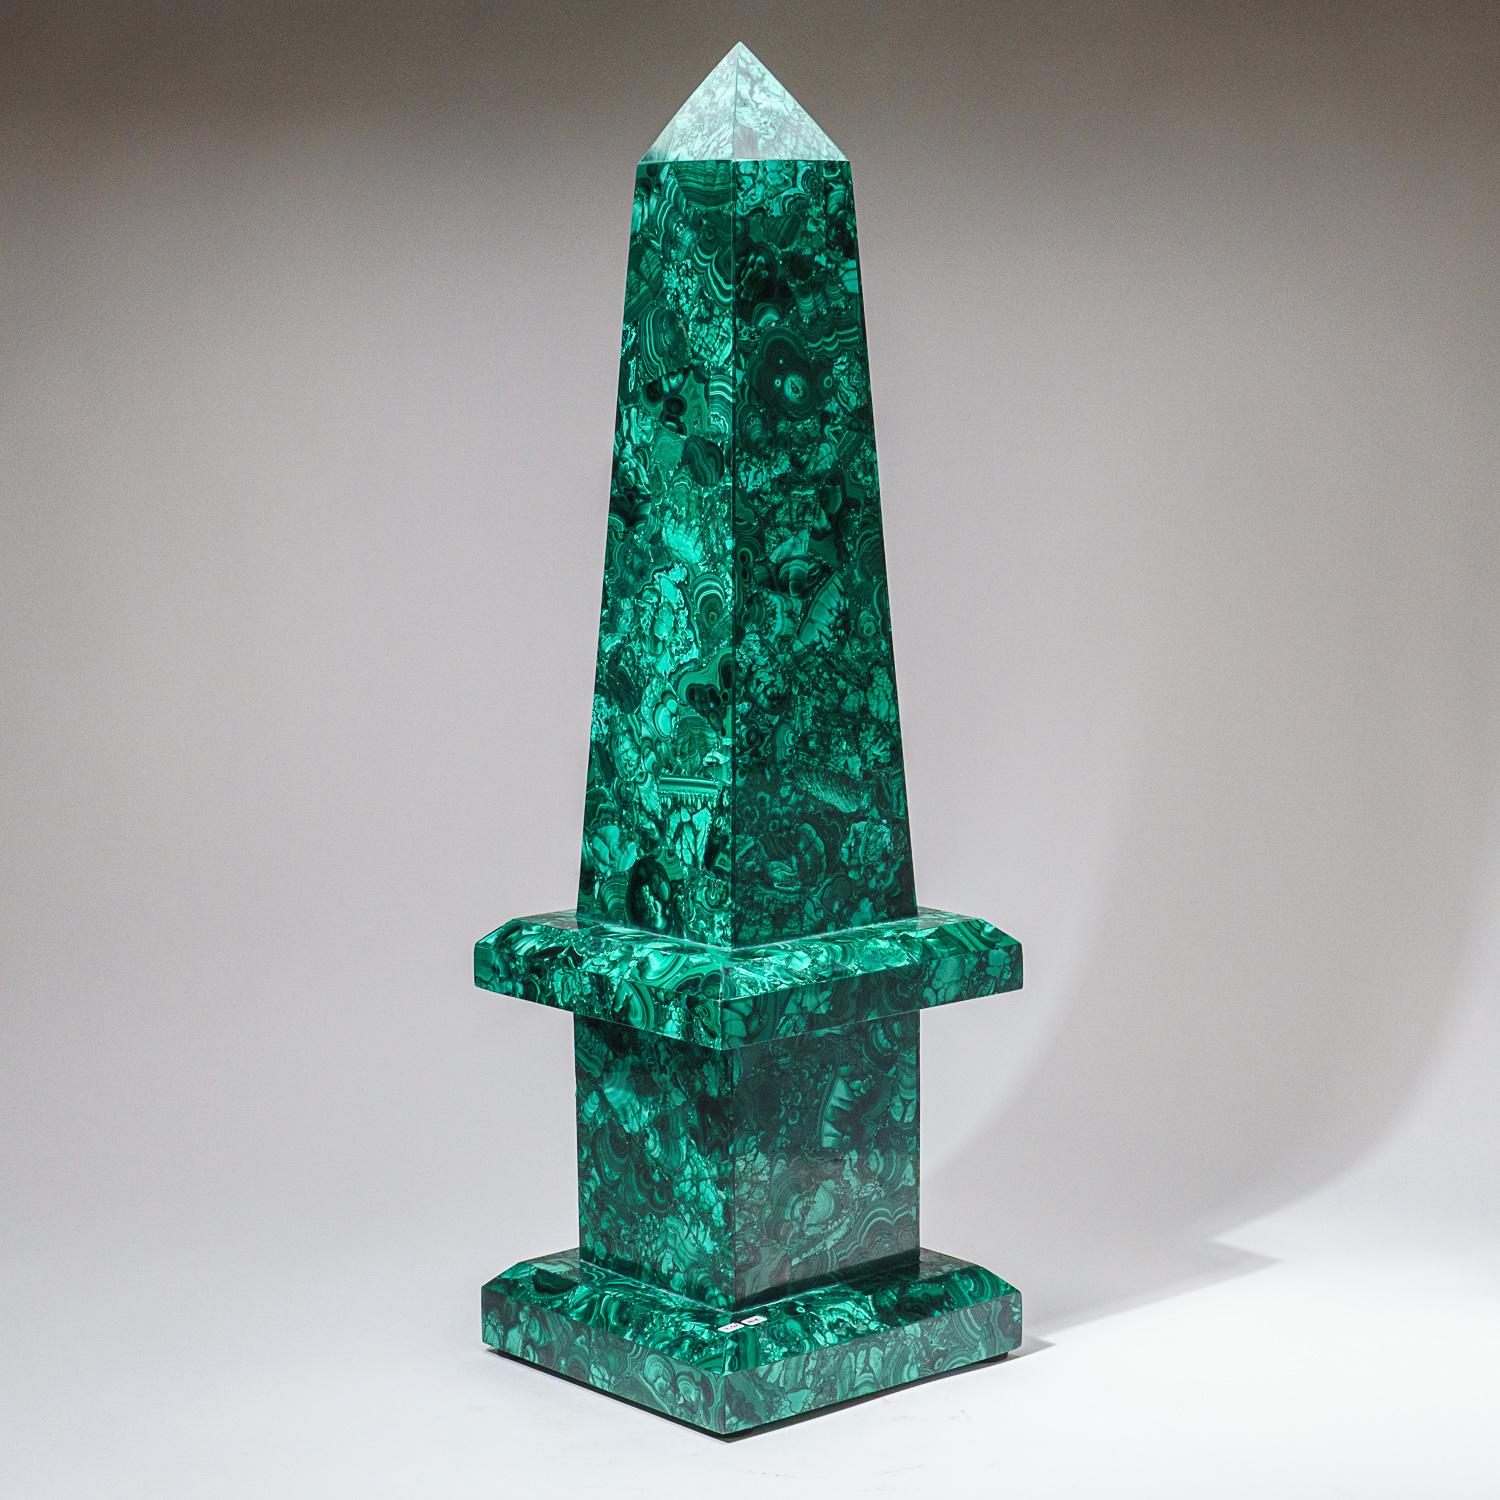 Contemporary Large Genuine Polished Malachite Obelisk (16.5 lbs) For Sale